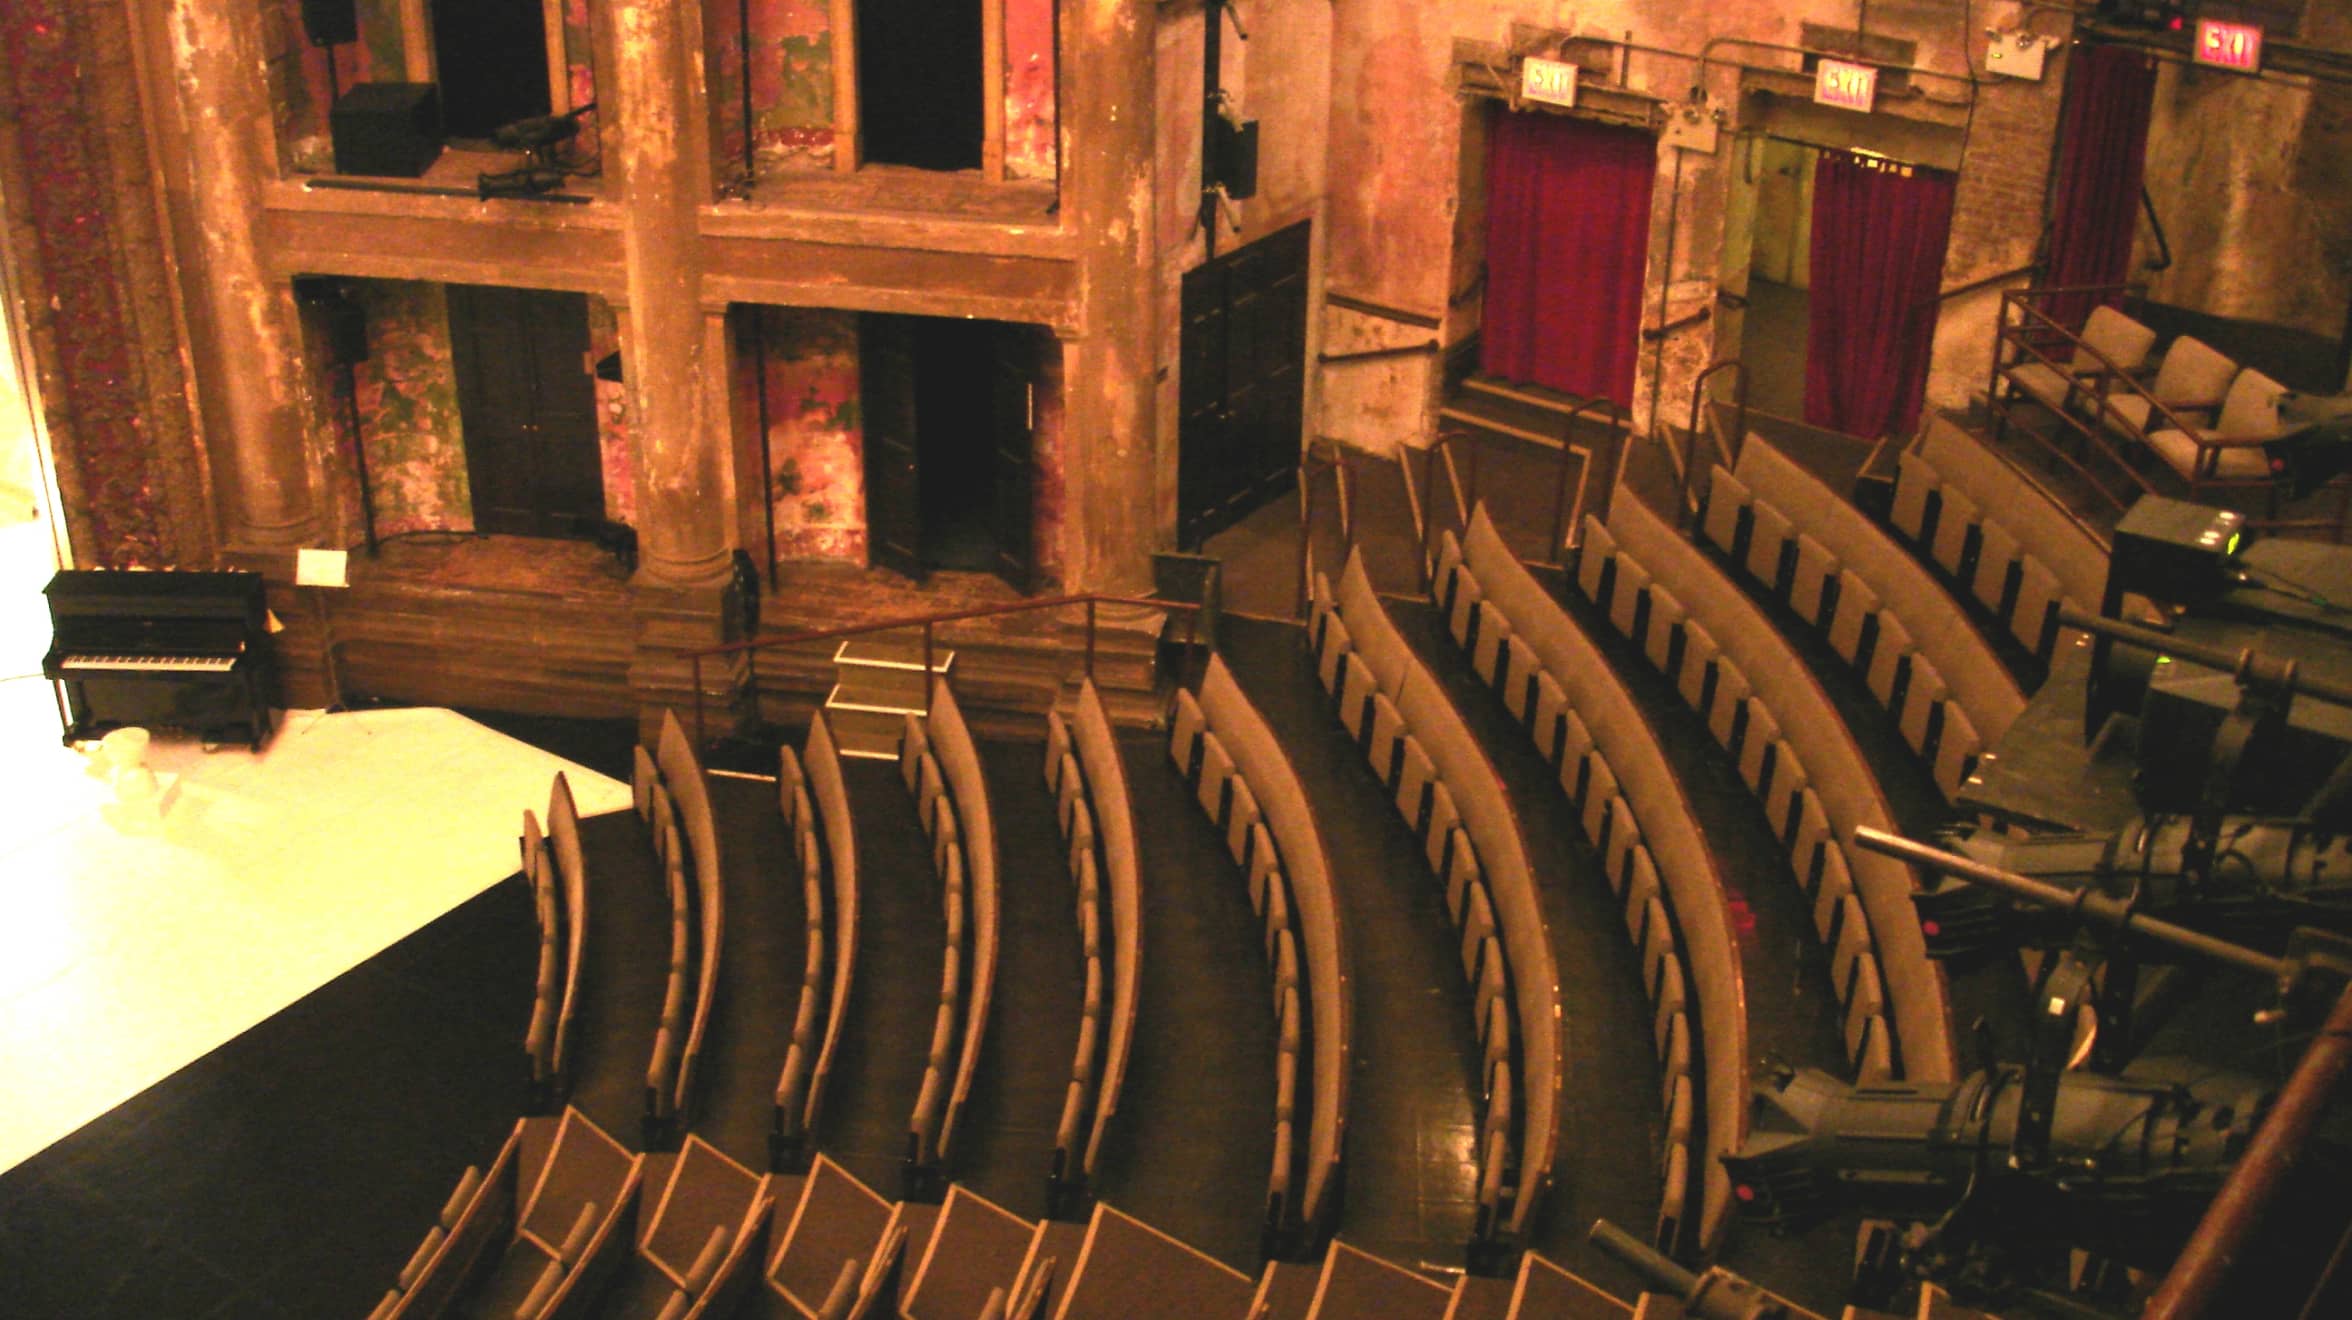 Brooklyn Academy of Music - Harvey Theatre | Prior to Seat ReplacementBrooklyn, New York